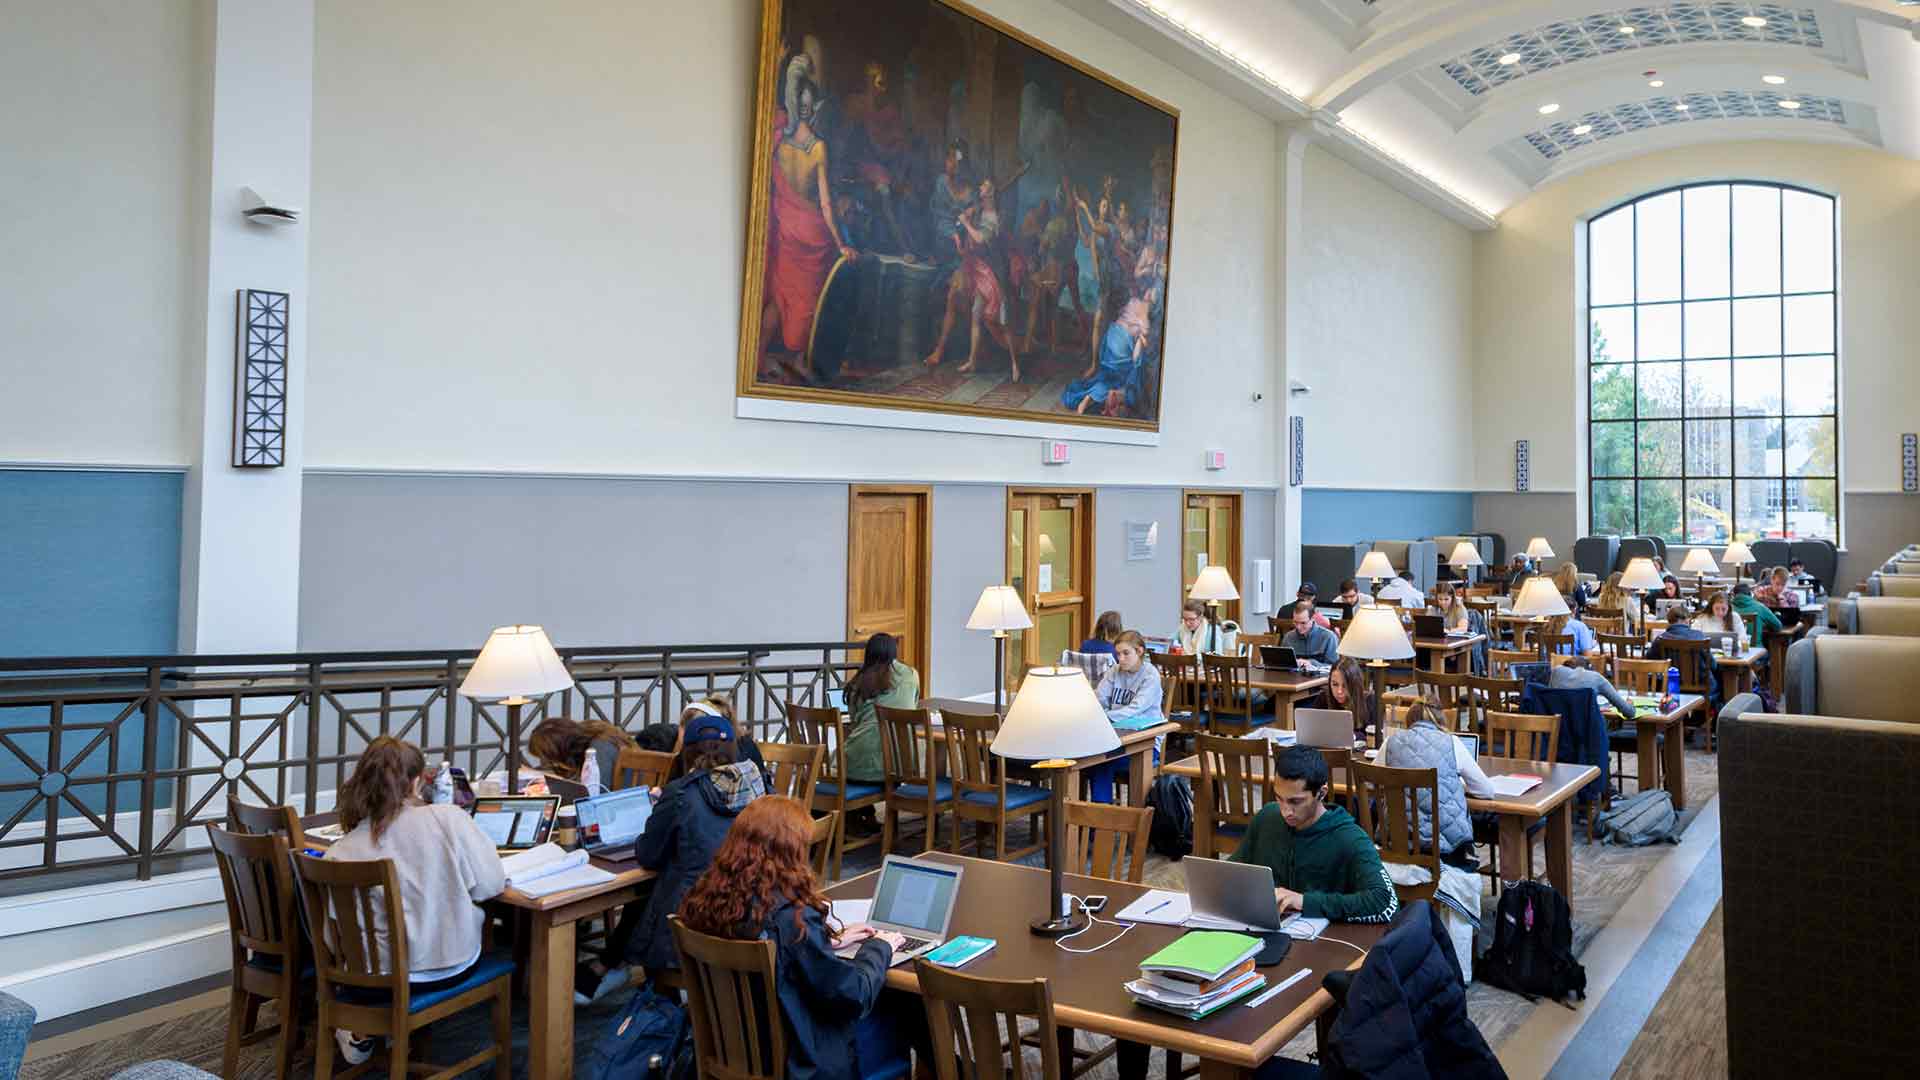 Students in the Falvey Library's Dugan Polk Family Reading Room sit at tables studying.